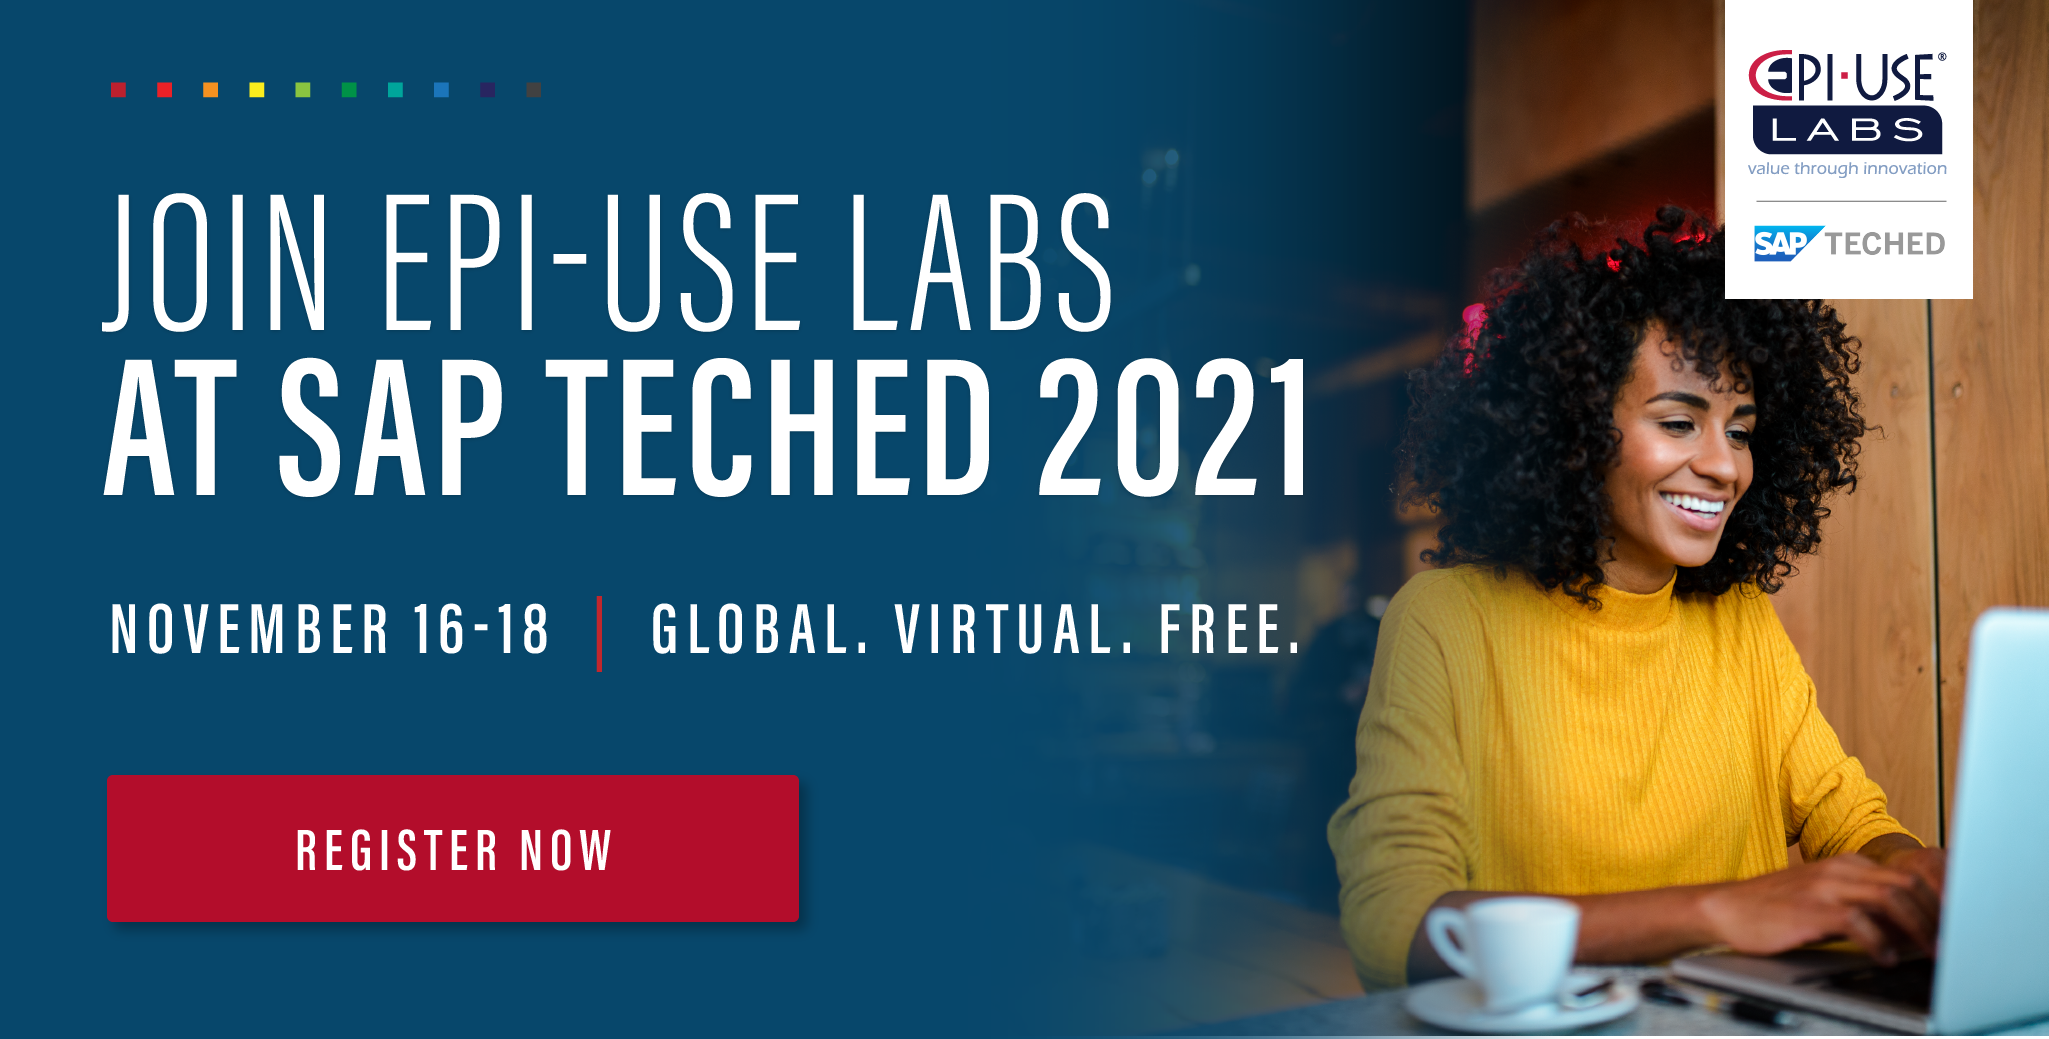 Join EPIUSE Labs at SAP TechEd 2021 Virtual Event for Developers